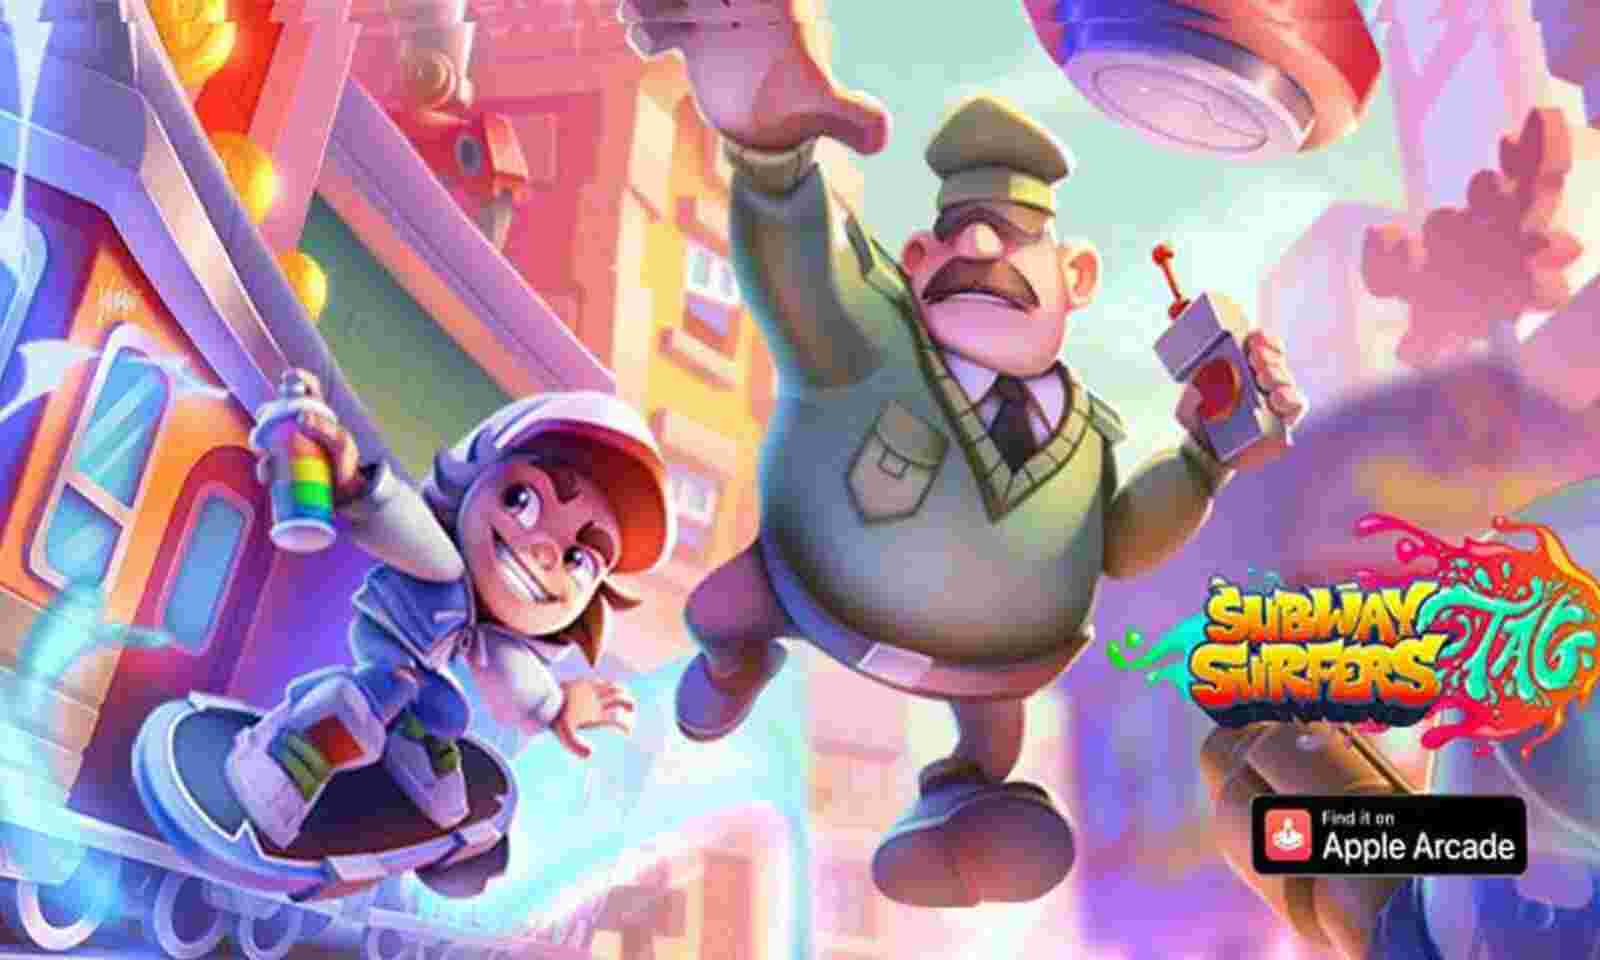 Subway Surfers on X: The new Subway Surfers update is out now